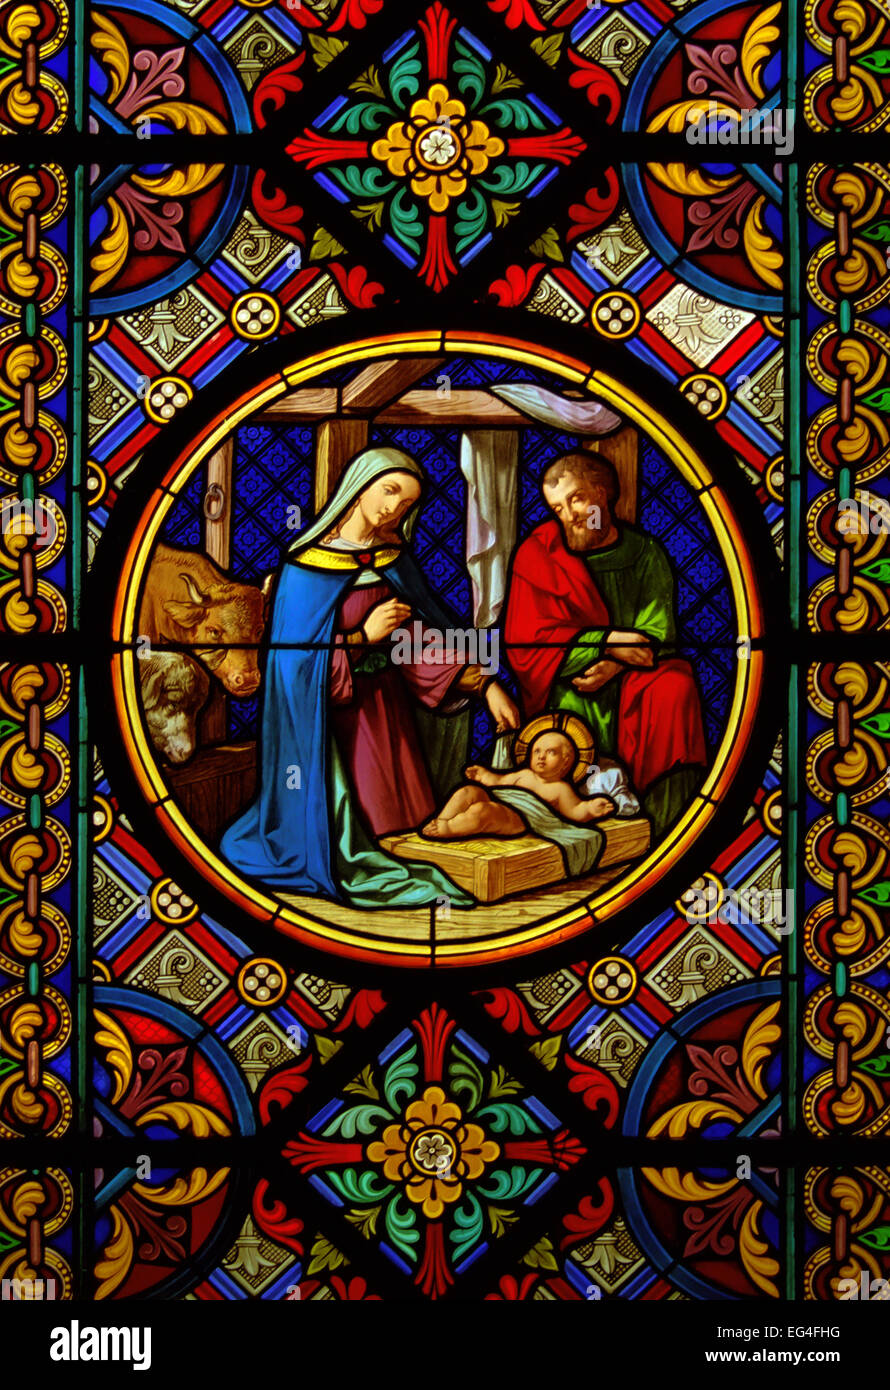 Christmas Cathedral stained glass window Jesus Maria Josef Stock Image